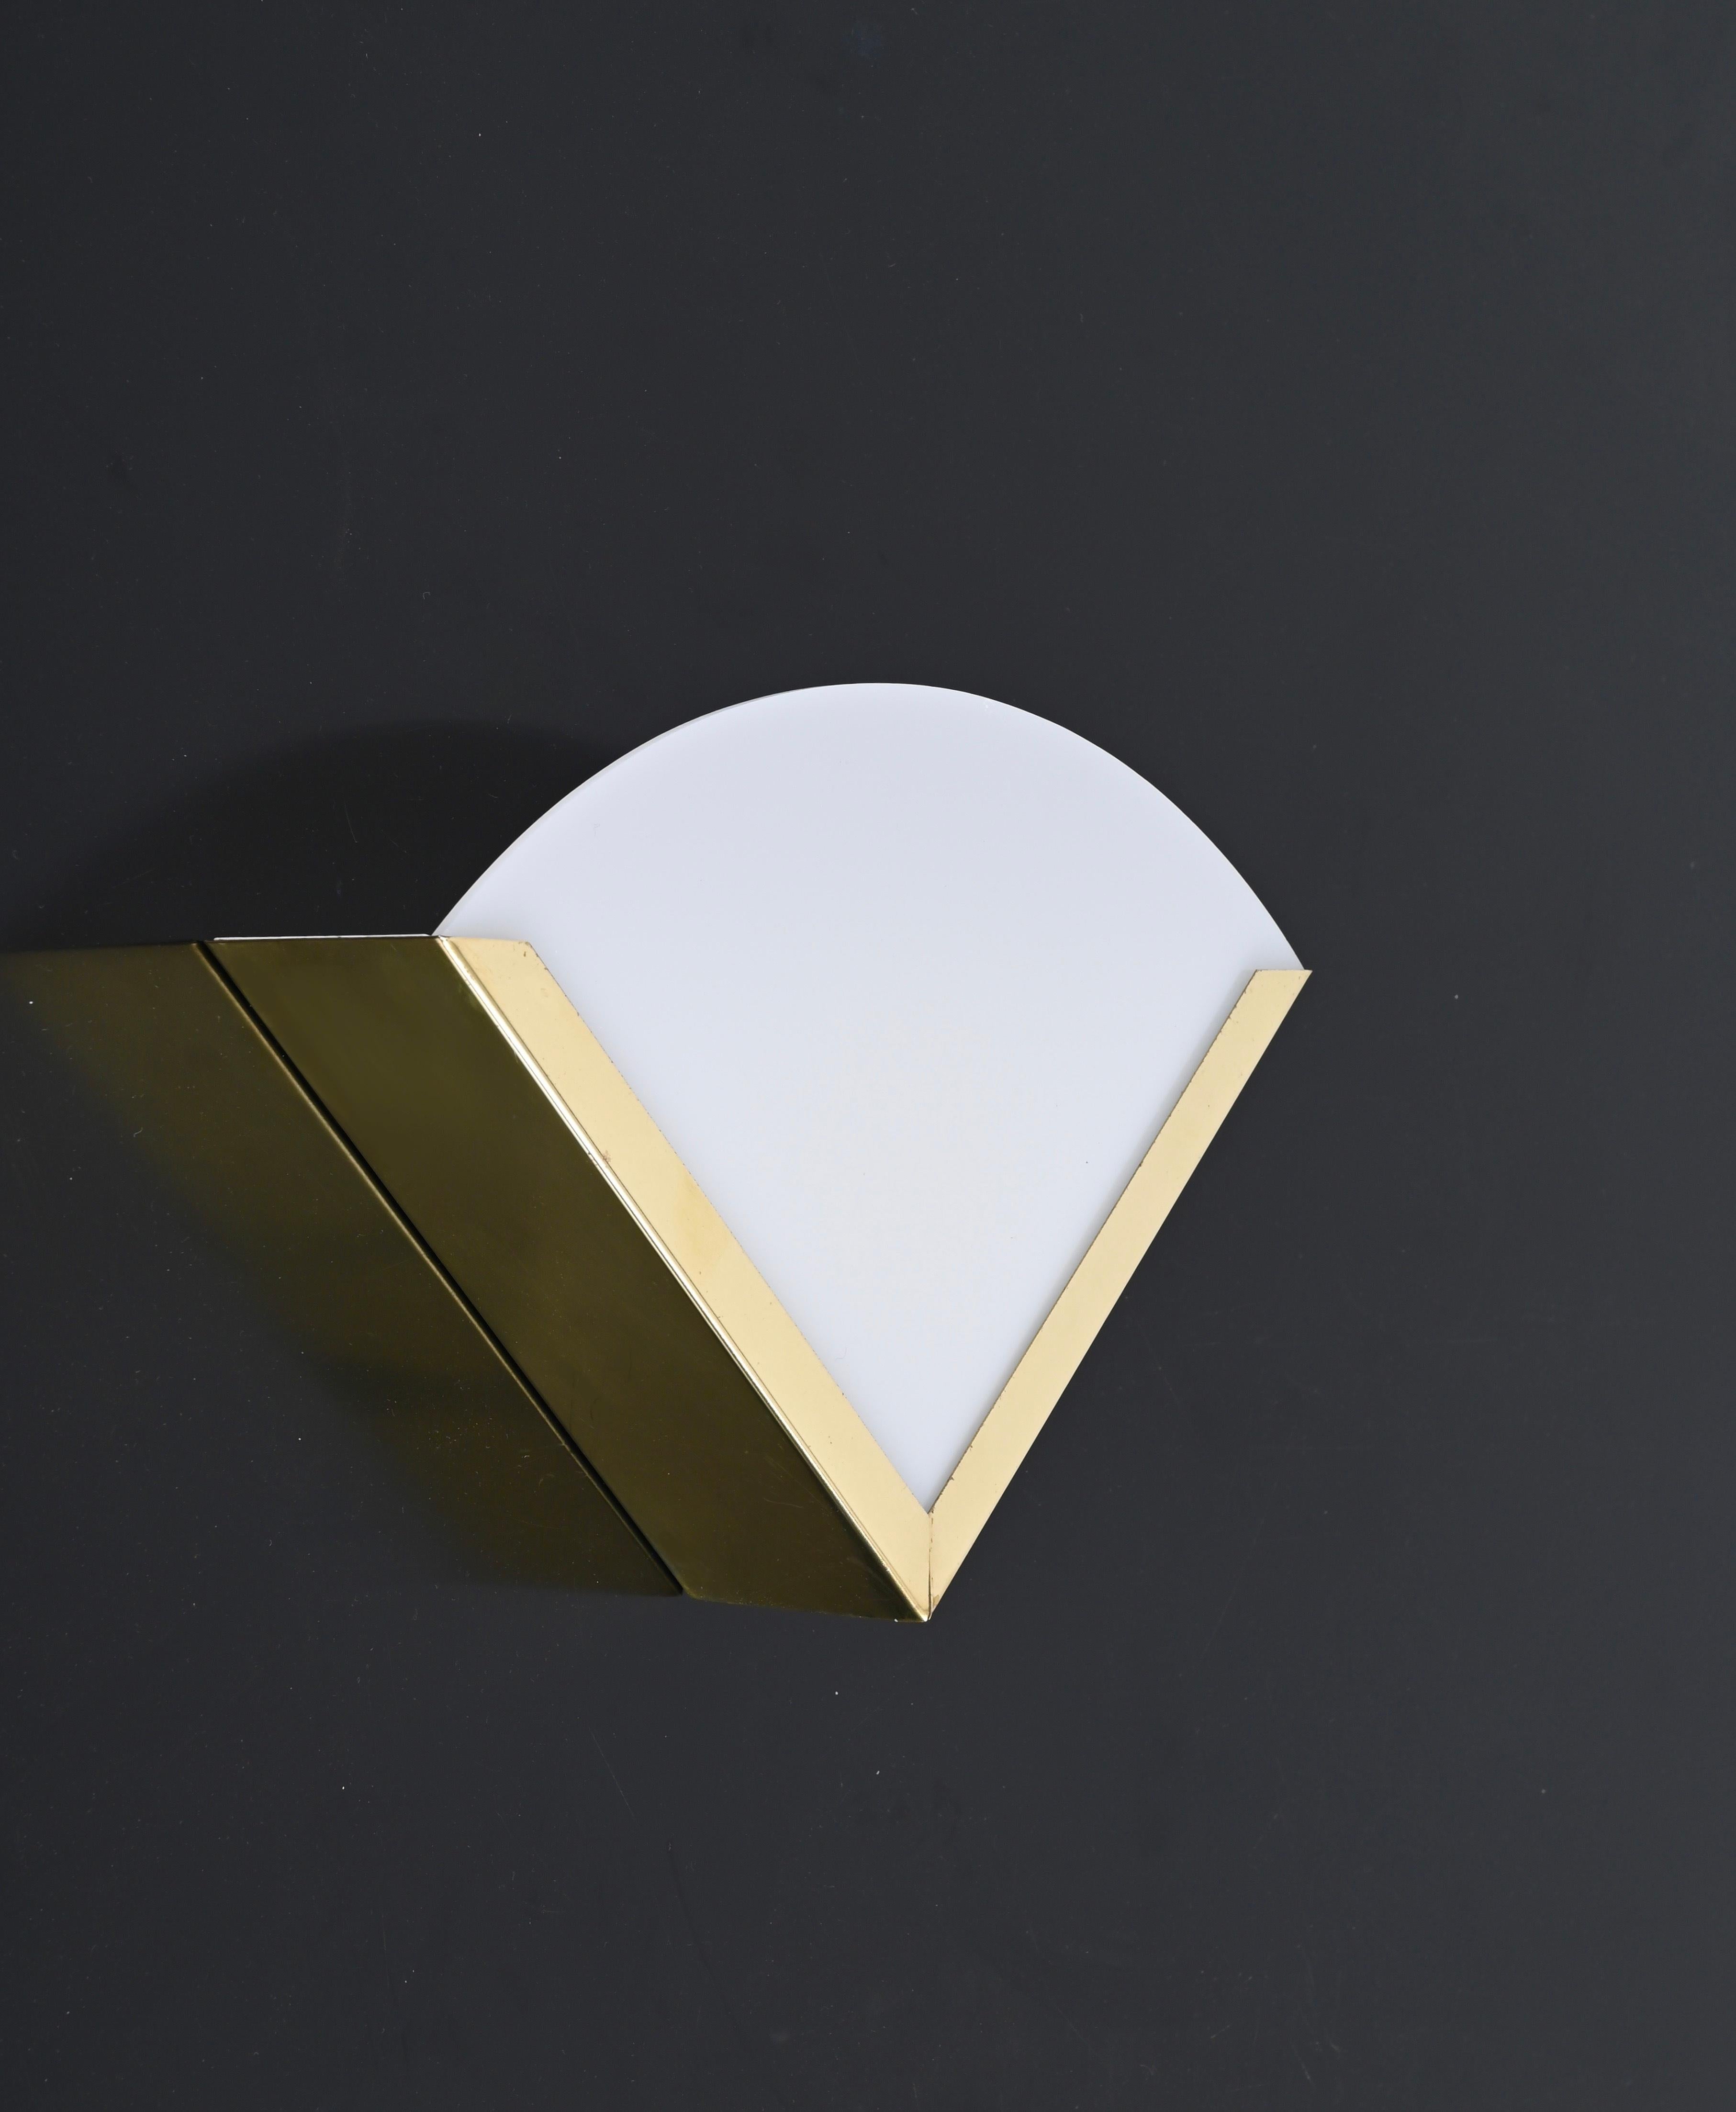 Mid-Century Modern Italian Triangular Sconces in Brass and White Perspex, Italy 1970s For Sale